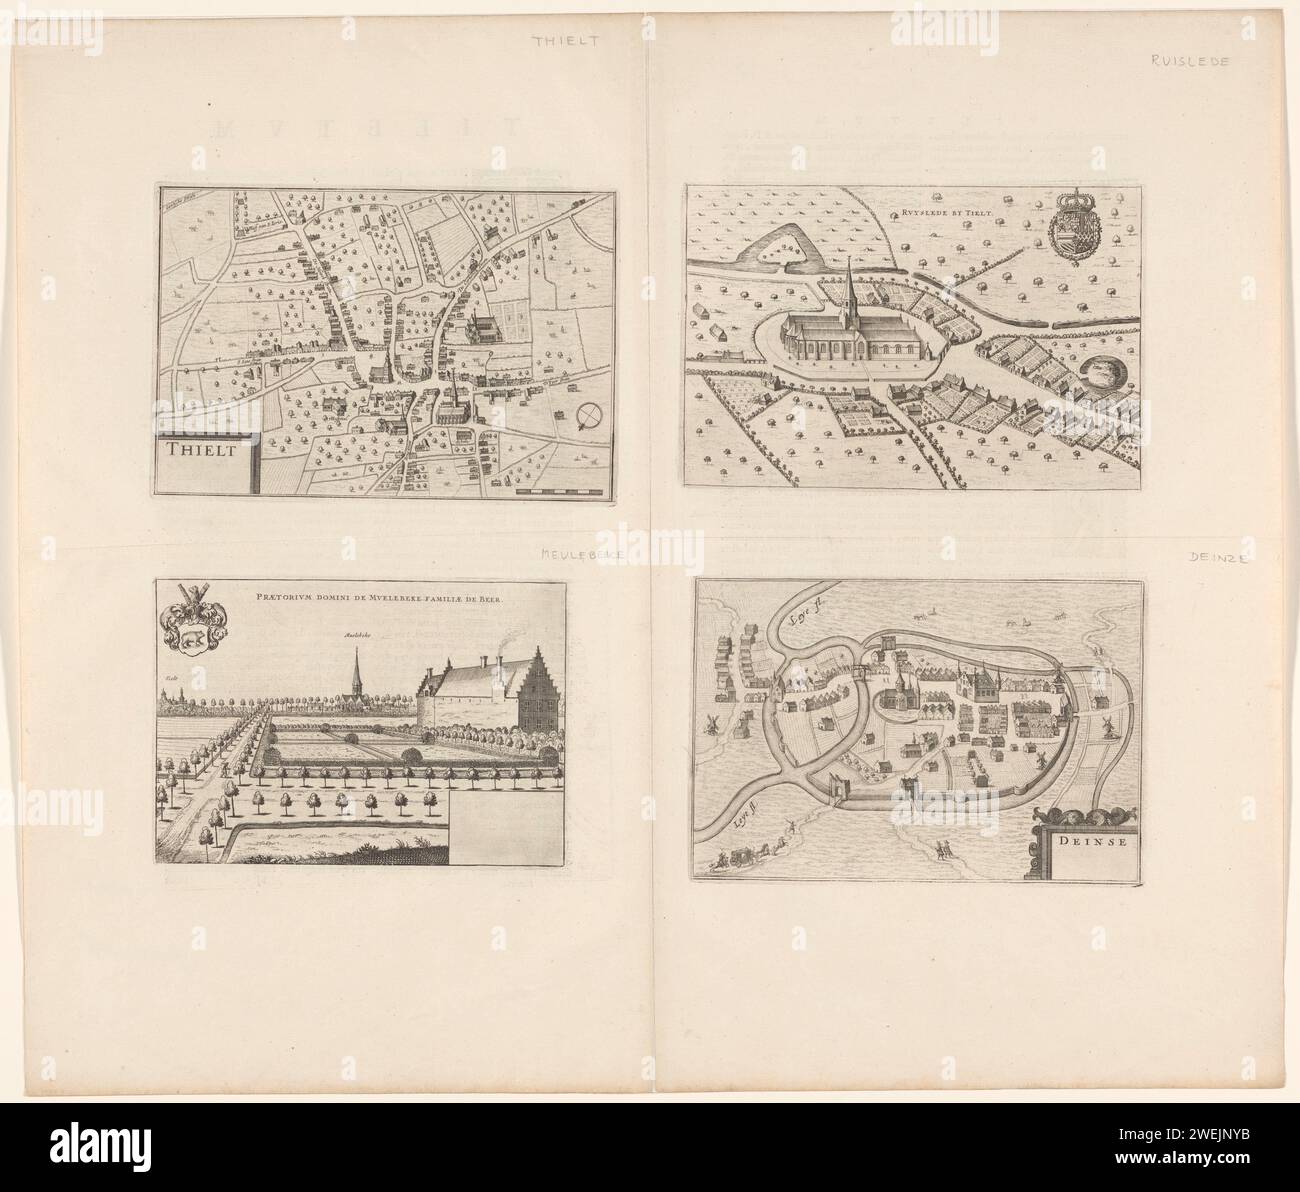 View of Ruiselede, Deinze and Meulebeke and a map of Tielt, Anonymous, 1652 print At the top left a map of Tielt with buildings in a nutshell perspective. Bottom left the title cartouche and bottom right a bowl without a scale. At the top right a face on Ruiselede in a nutshell perspective. At the top right the weapon of the king of Spain. At the bottom right a face on Deinze in a nutshell perspective. At the bottom right the title cartouche. Bottom left a face on the castle of Ter Borcht with Meulebeke behind it. At the top left the weapon of Meulebeke, also the coat of arms of the De Beer fa Stock Photo